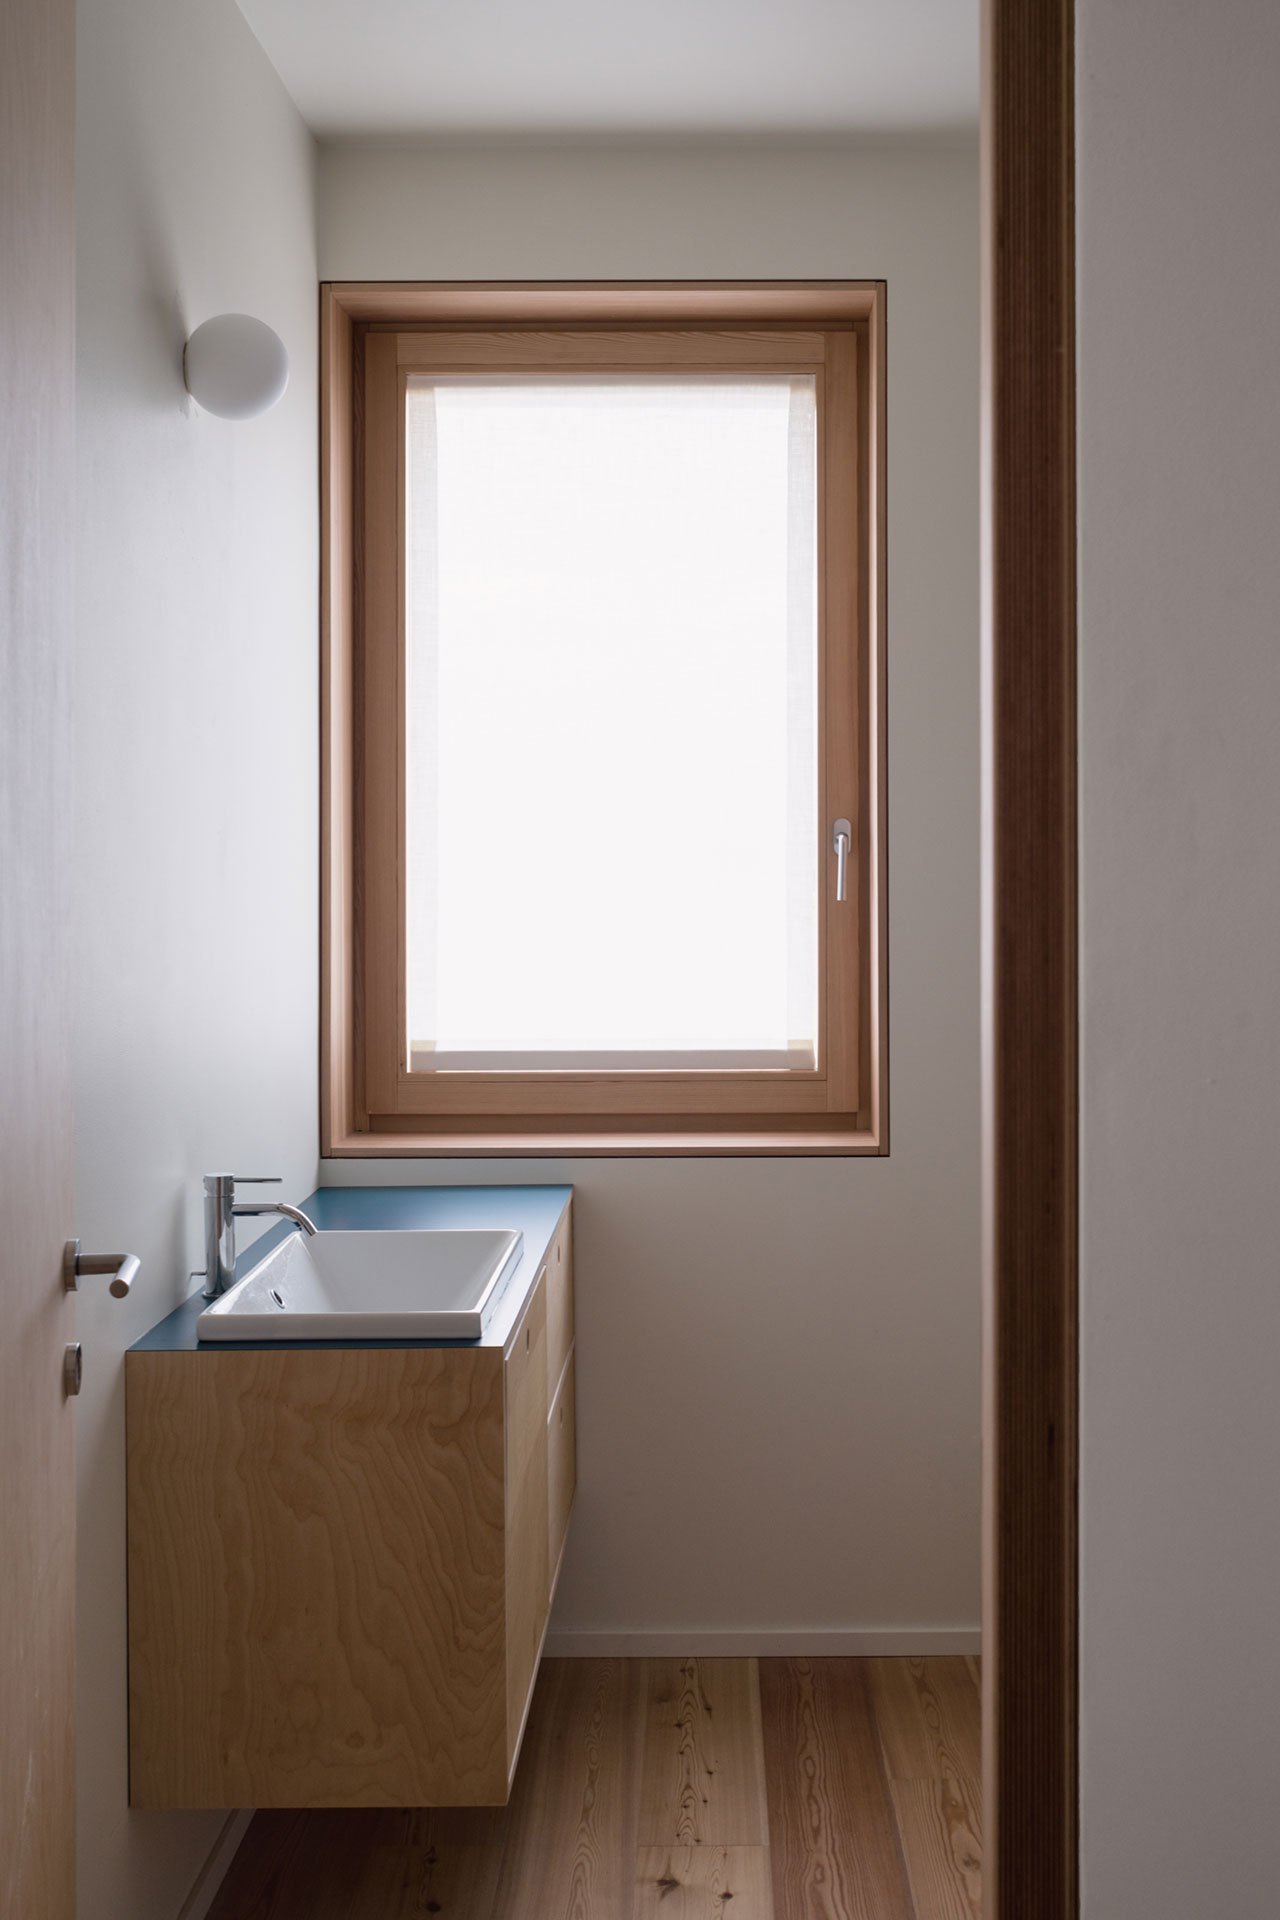 The bathrooms also feature windows that fill the space with natural light but the window is frosted